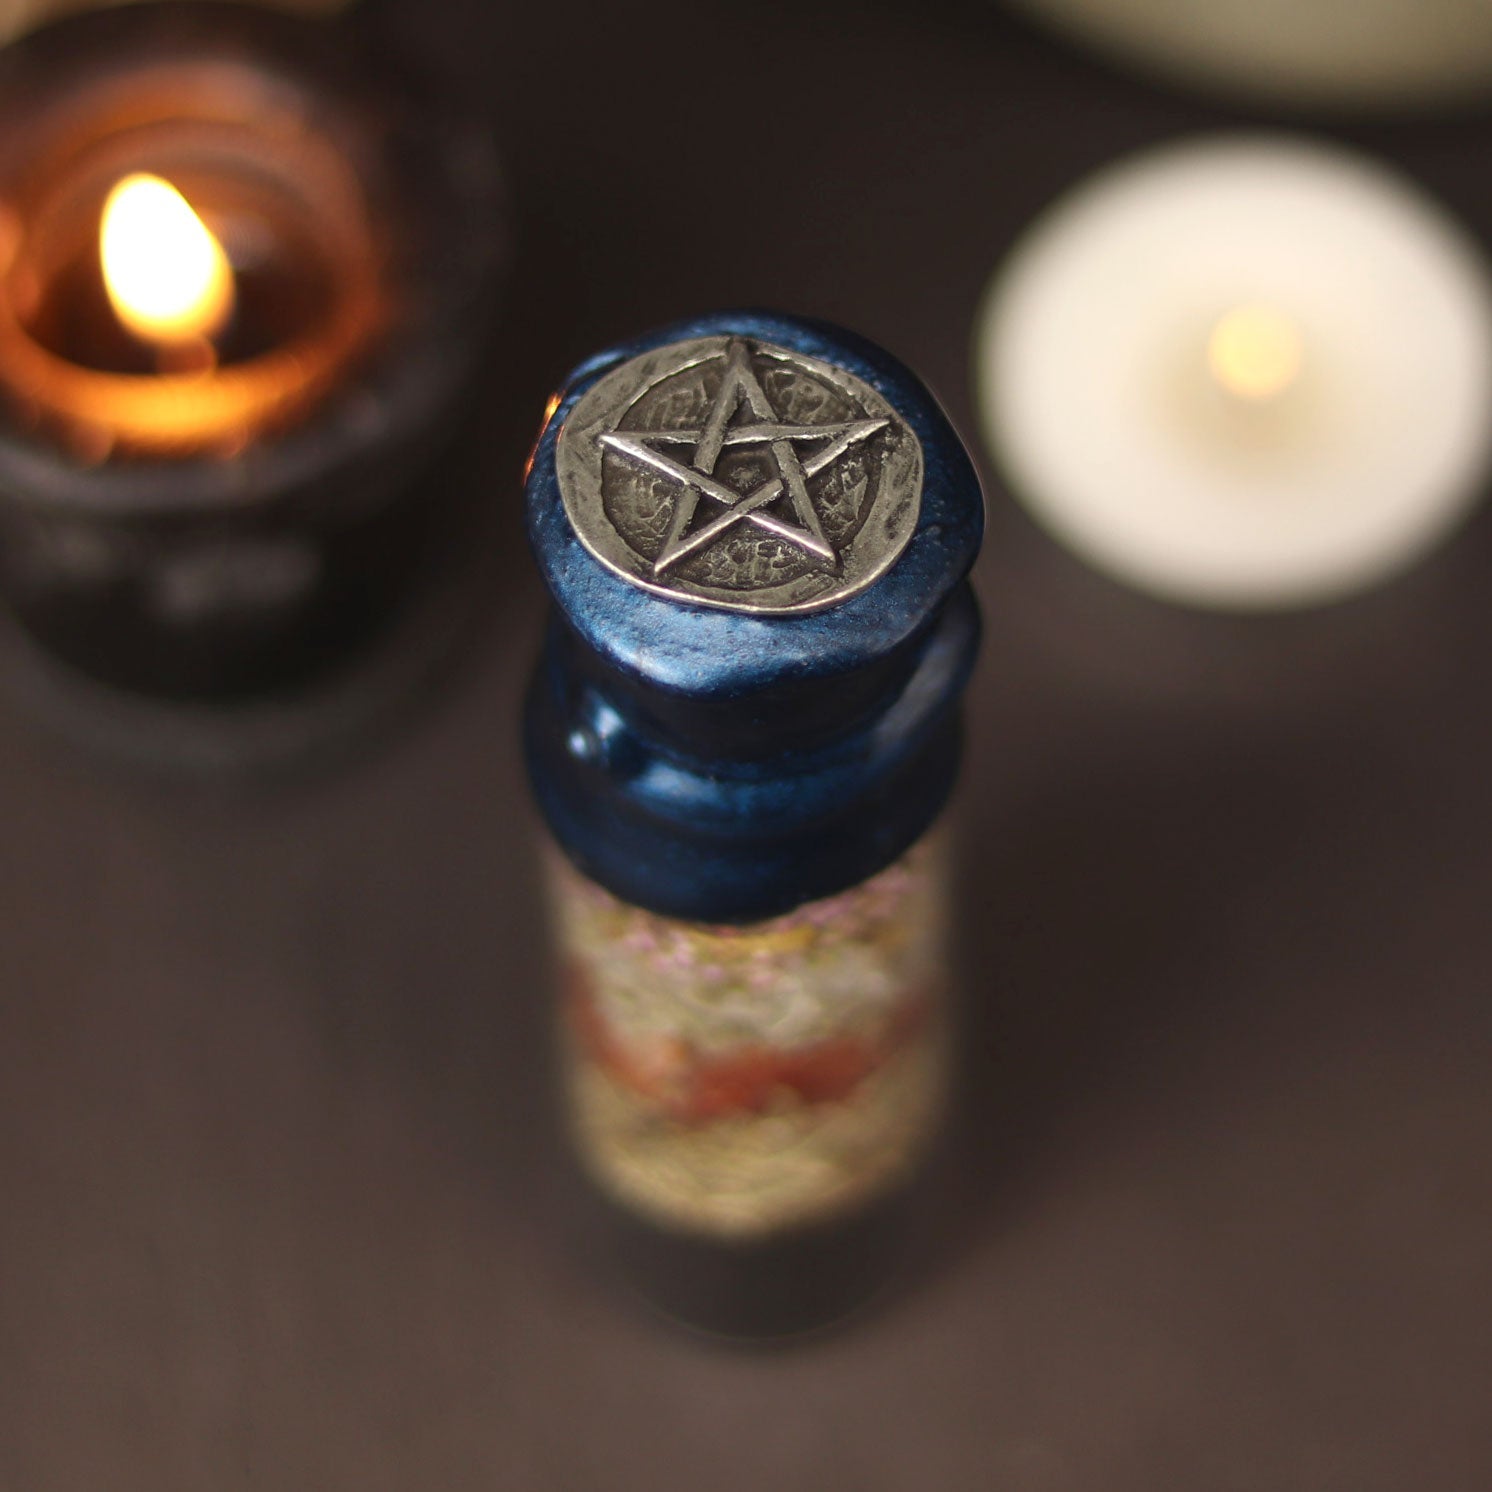 Pentacle Protection Spell Bottle - 13 Moons